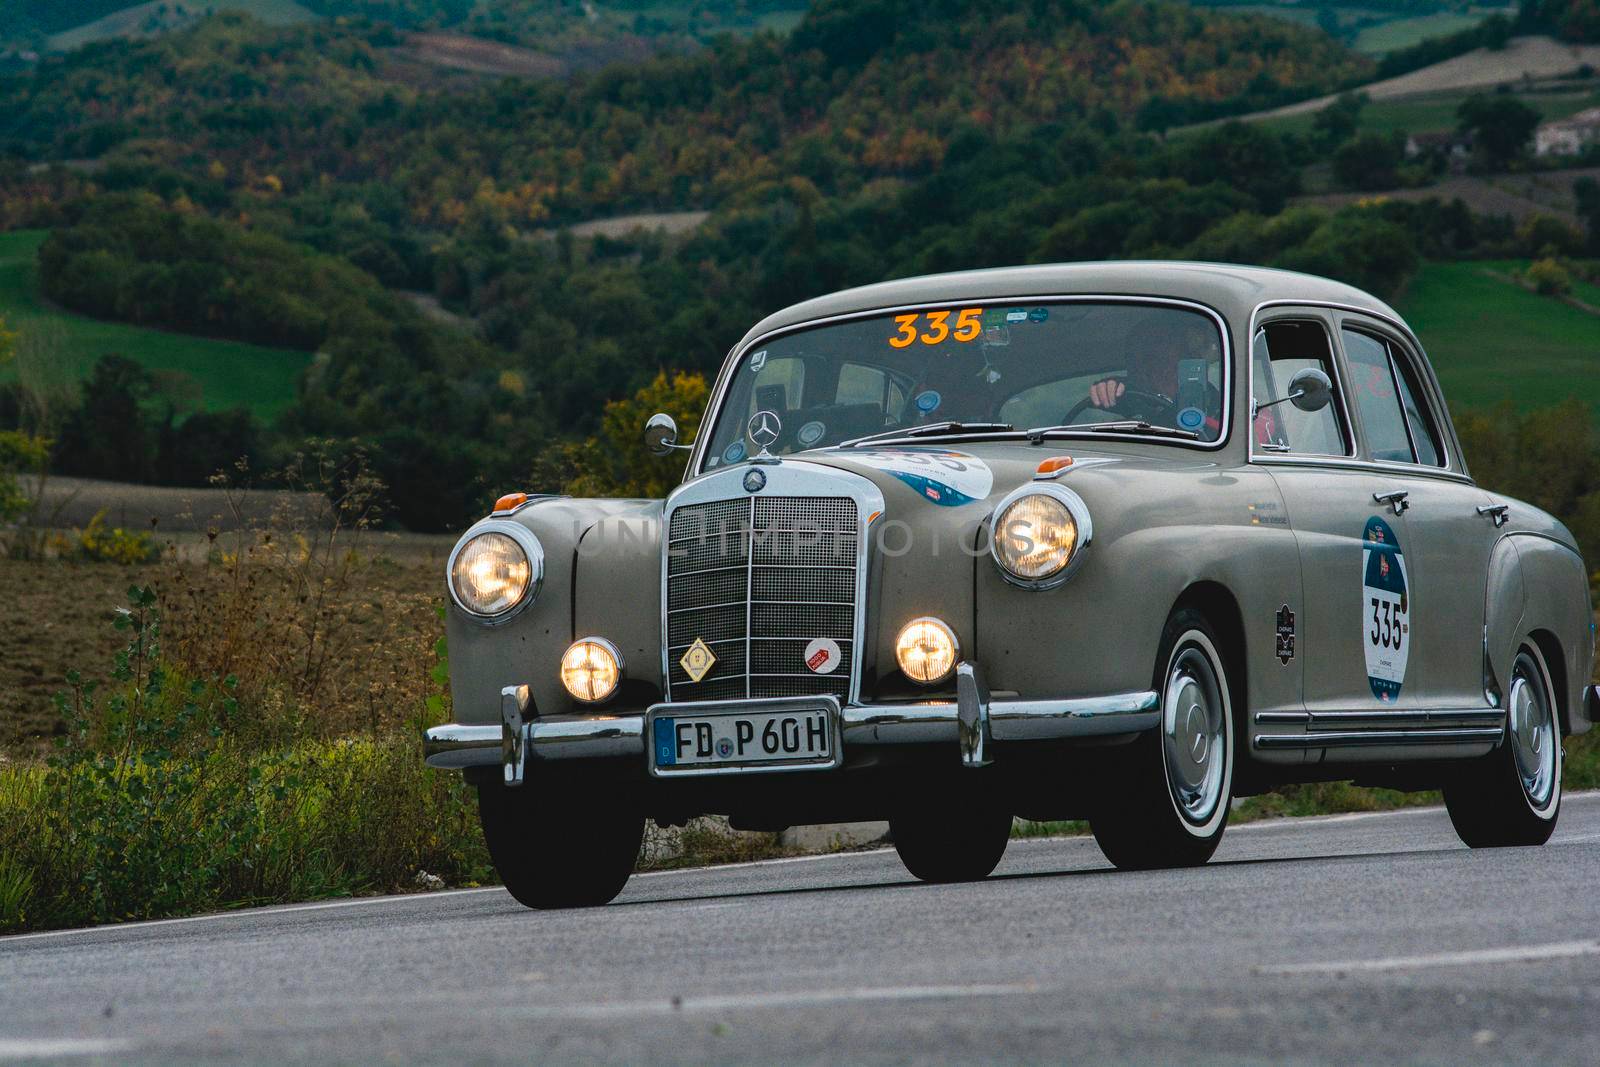 MERCEDES-BENZ 220 A 1955 an old racing car in rally Mille Miglia 2020 the famous italian historical race (1927-1957) by massimocampanari